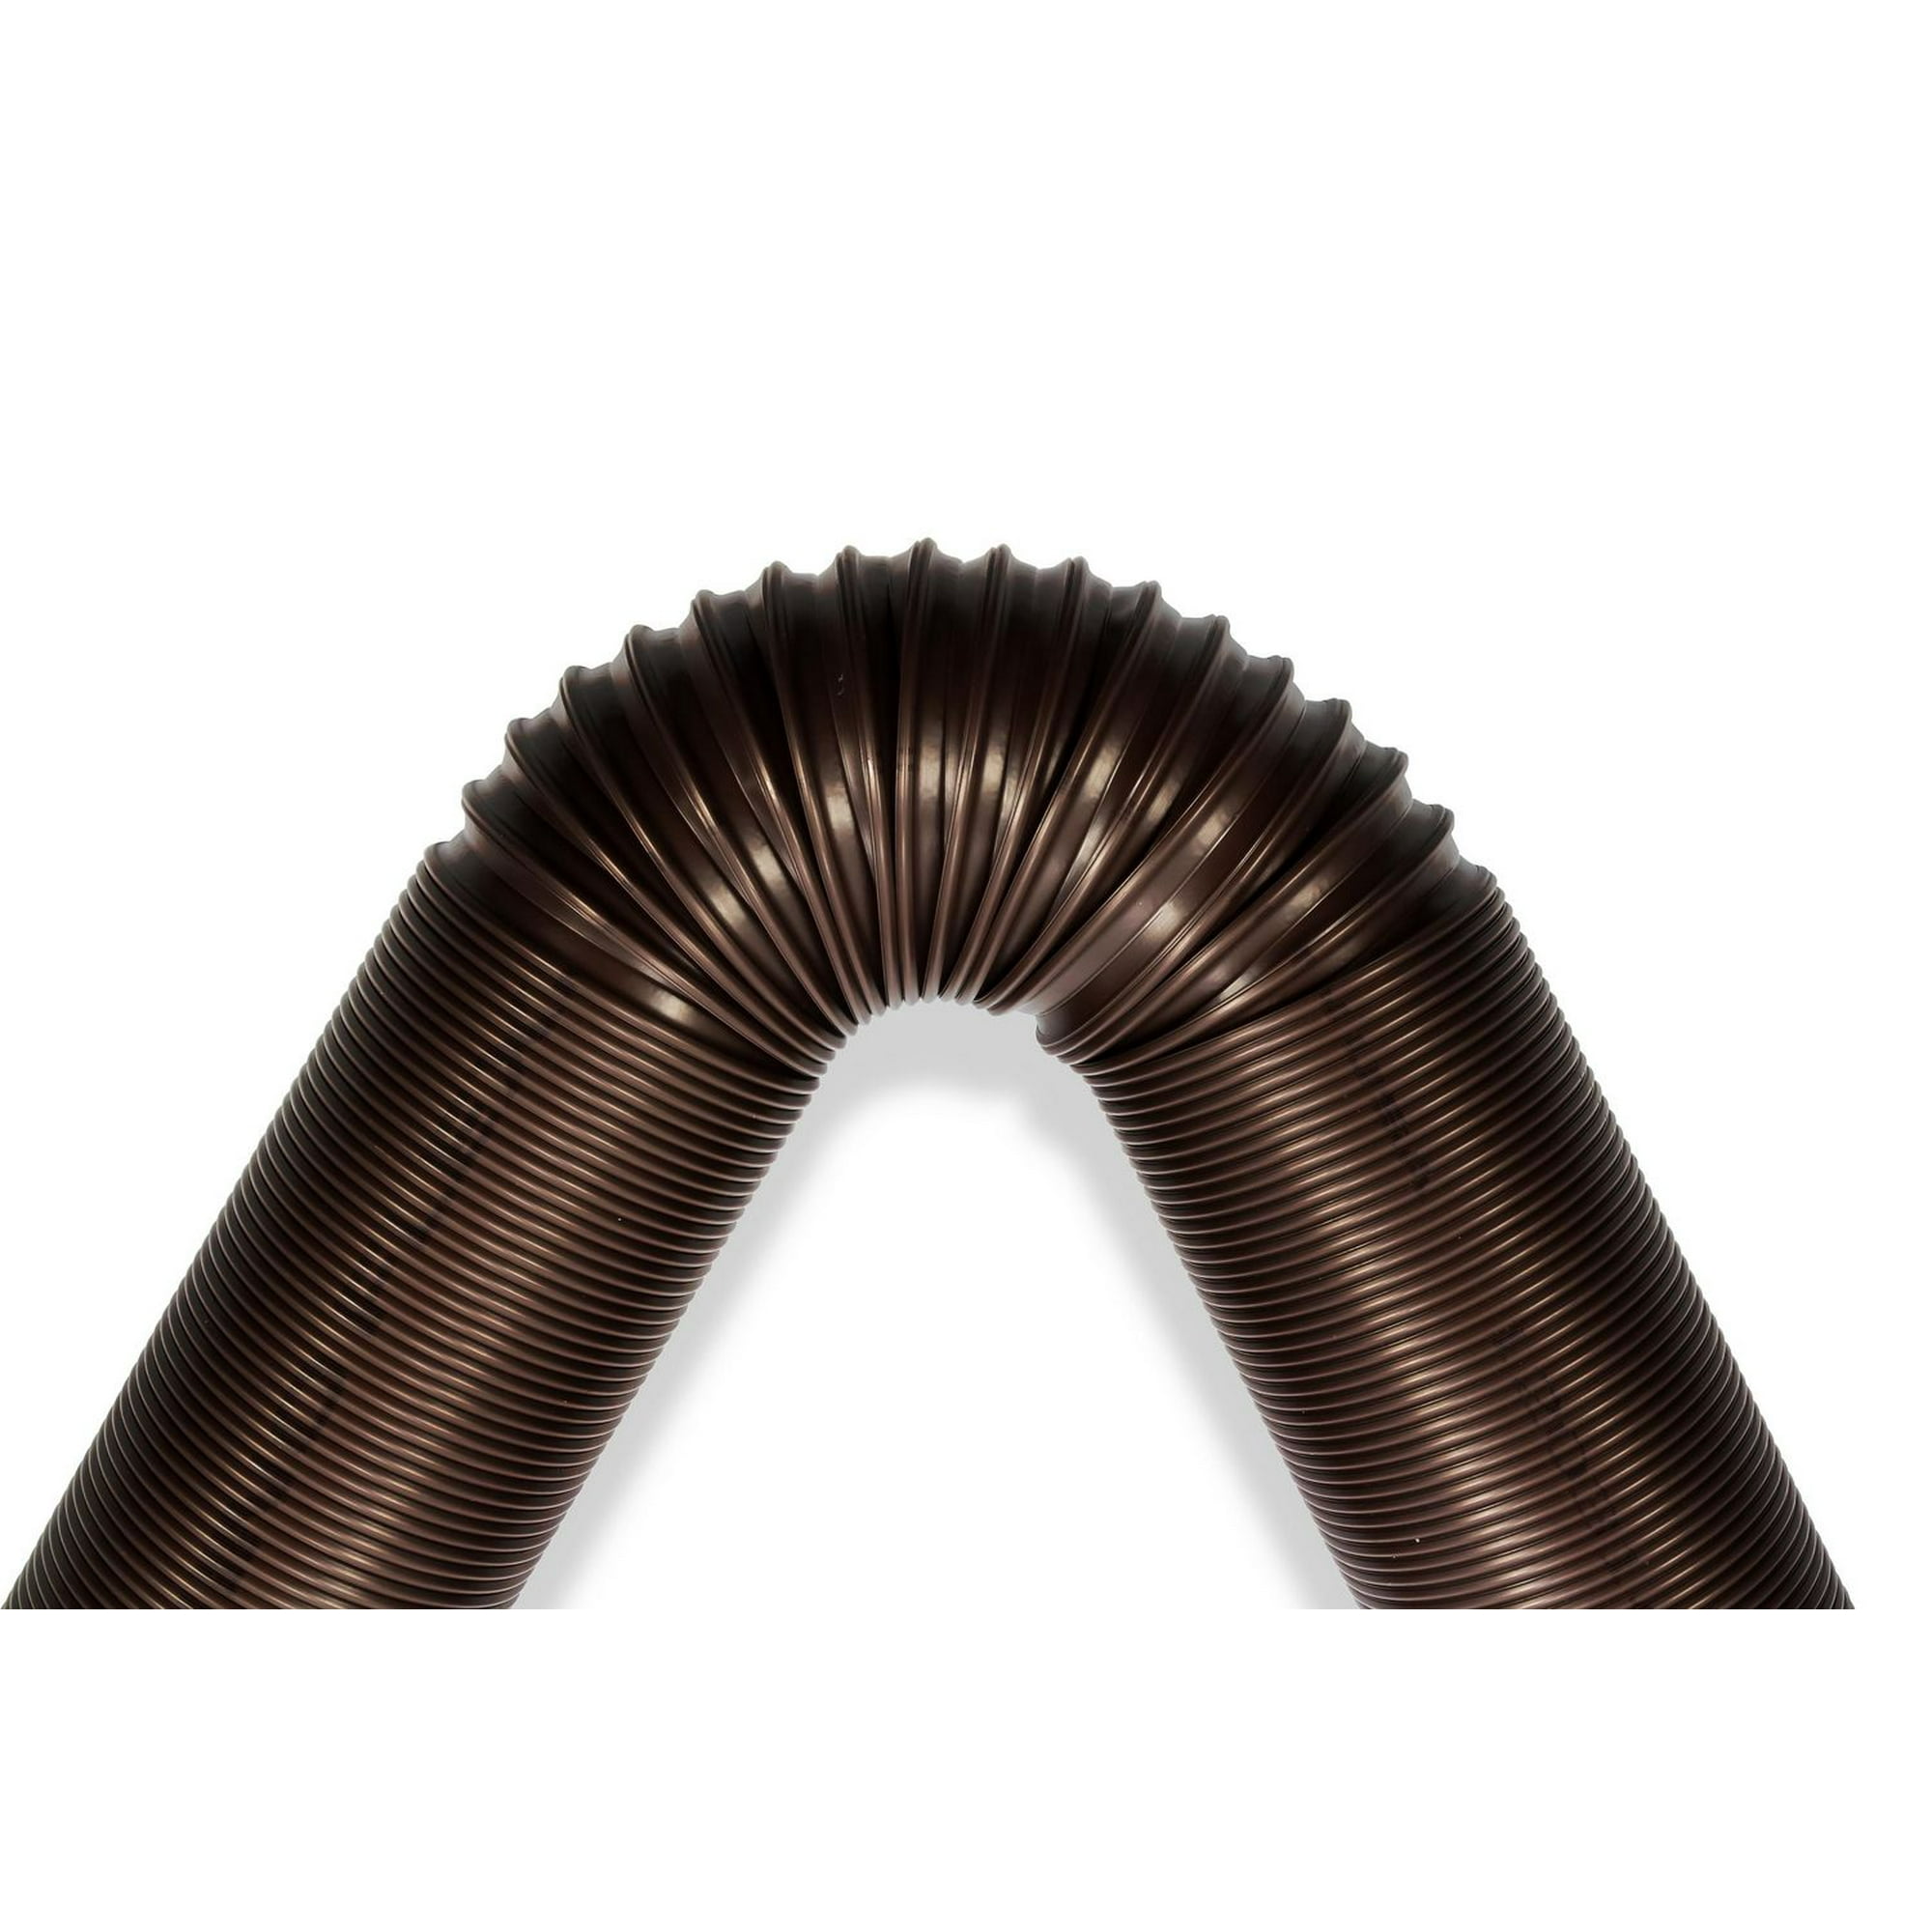 Get A Wholesale sewer hose kit For Your Needs 